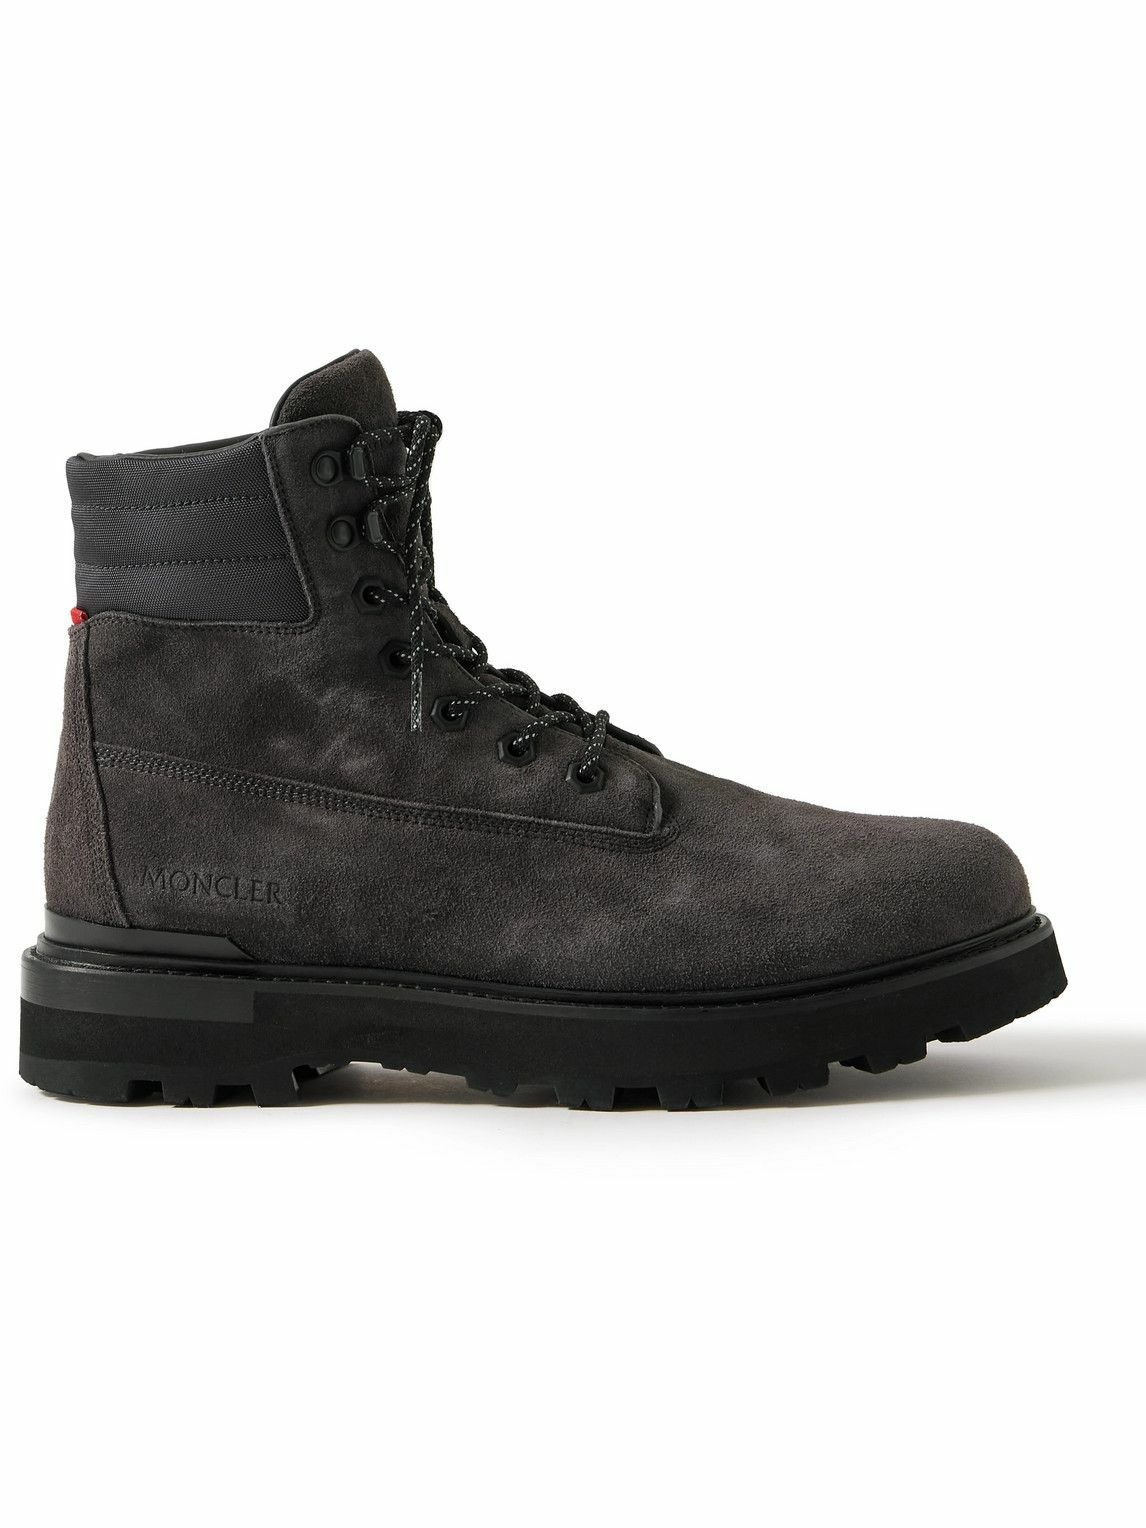 Photo: Moncler - Peka Trek Nylon-Trimmed Suede Hiking Boots - Gray